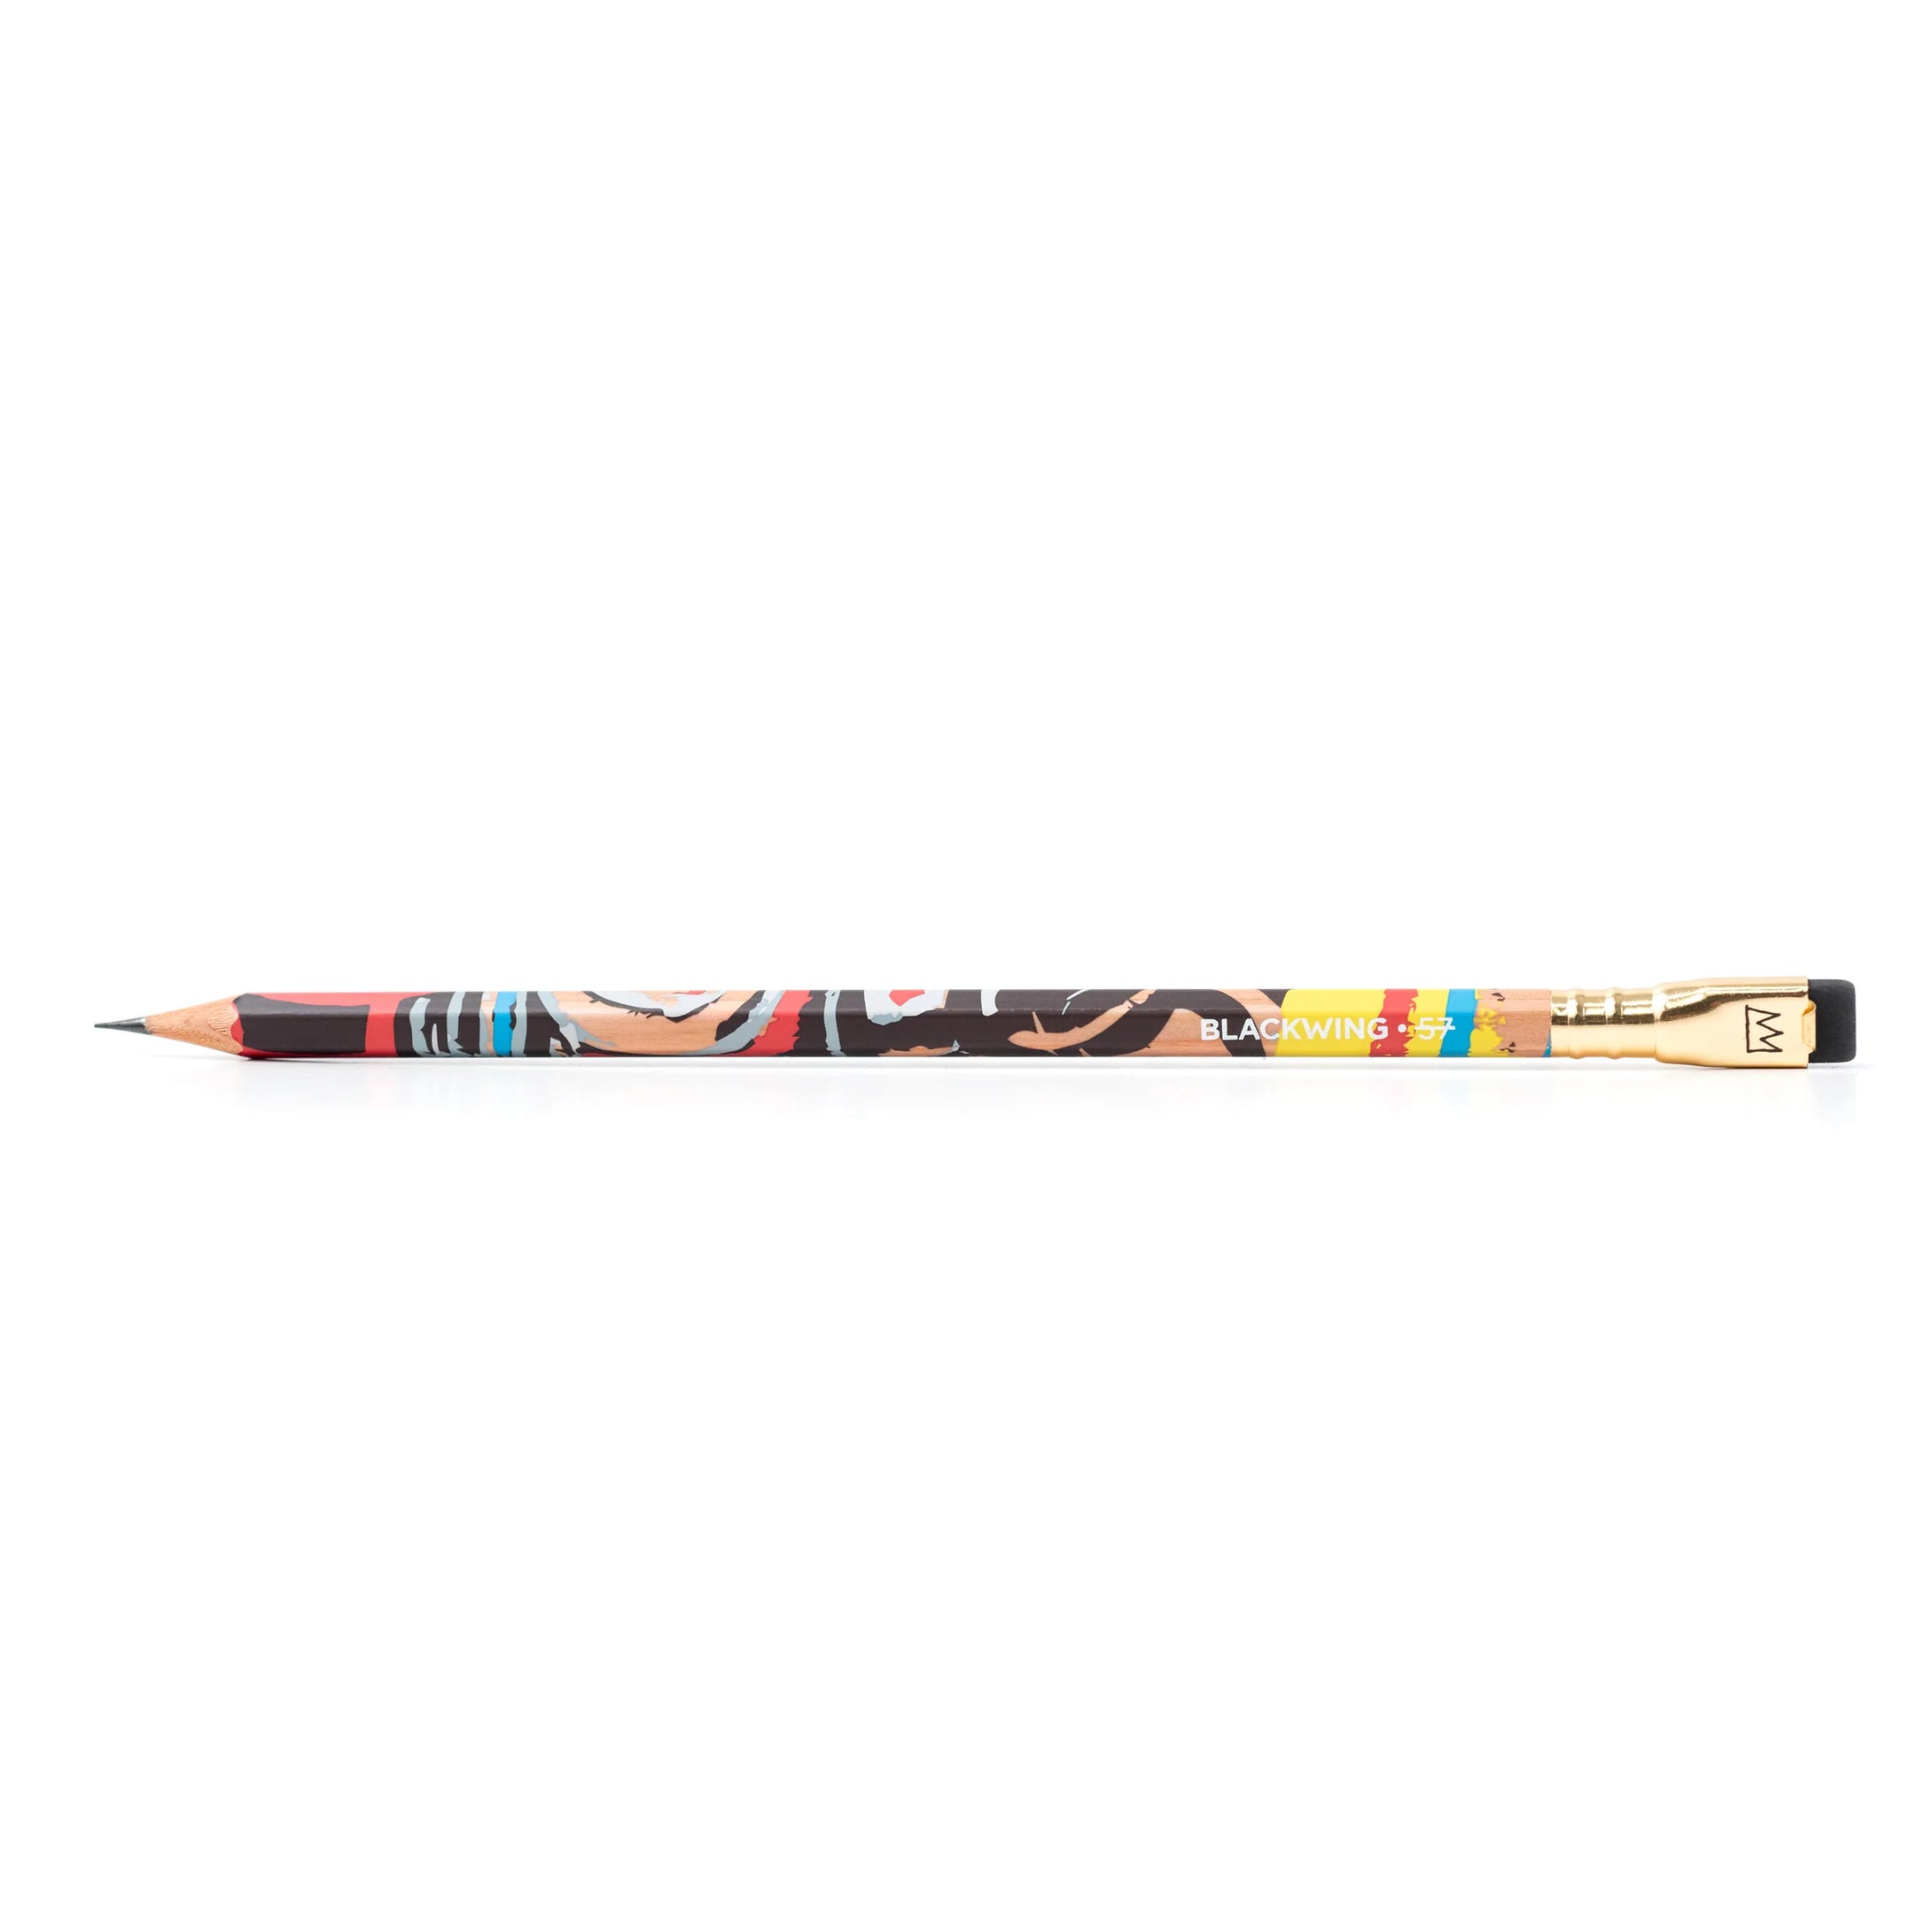 Blackwing 57 limited edition